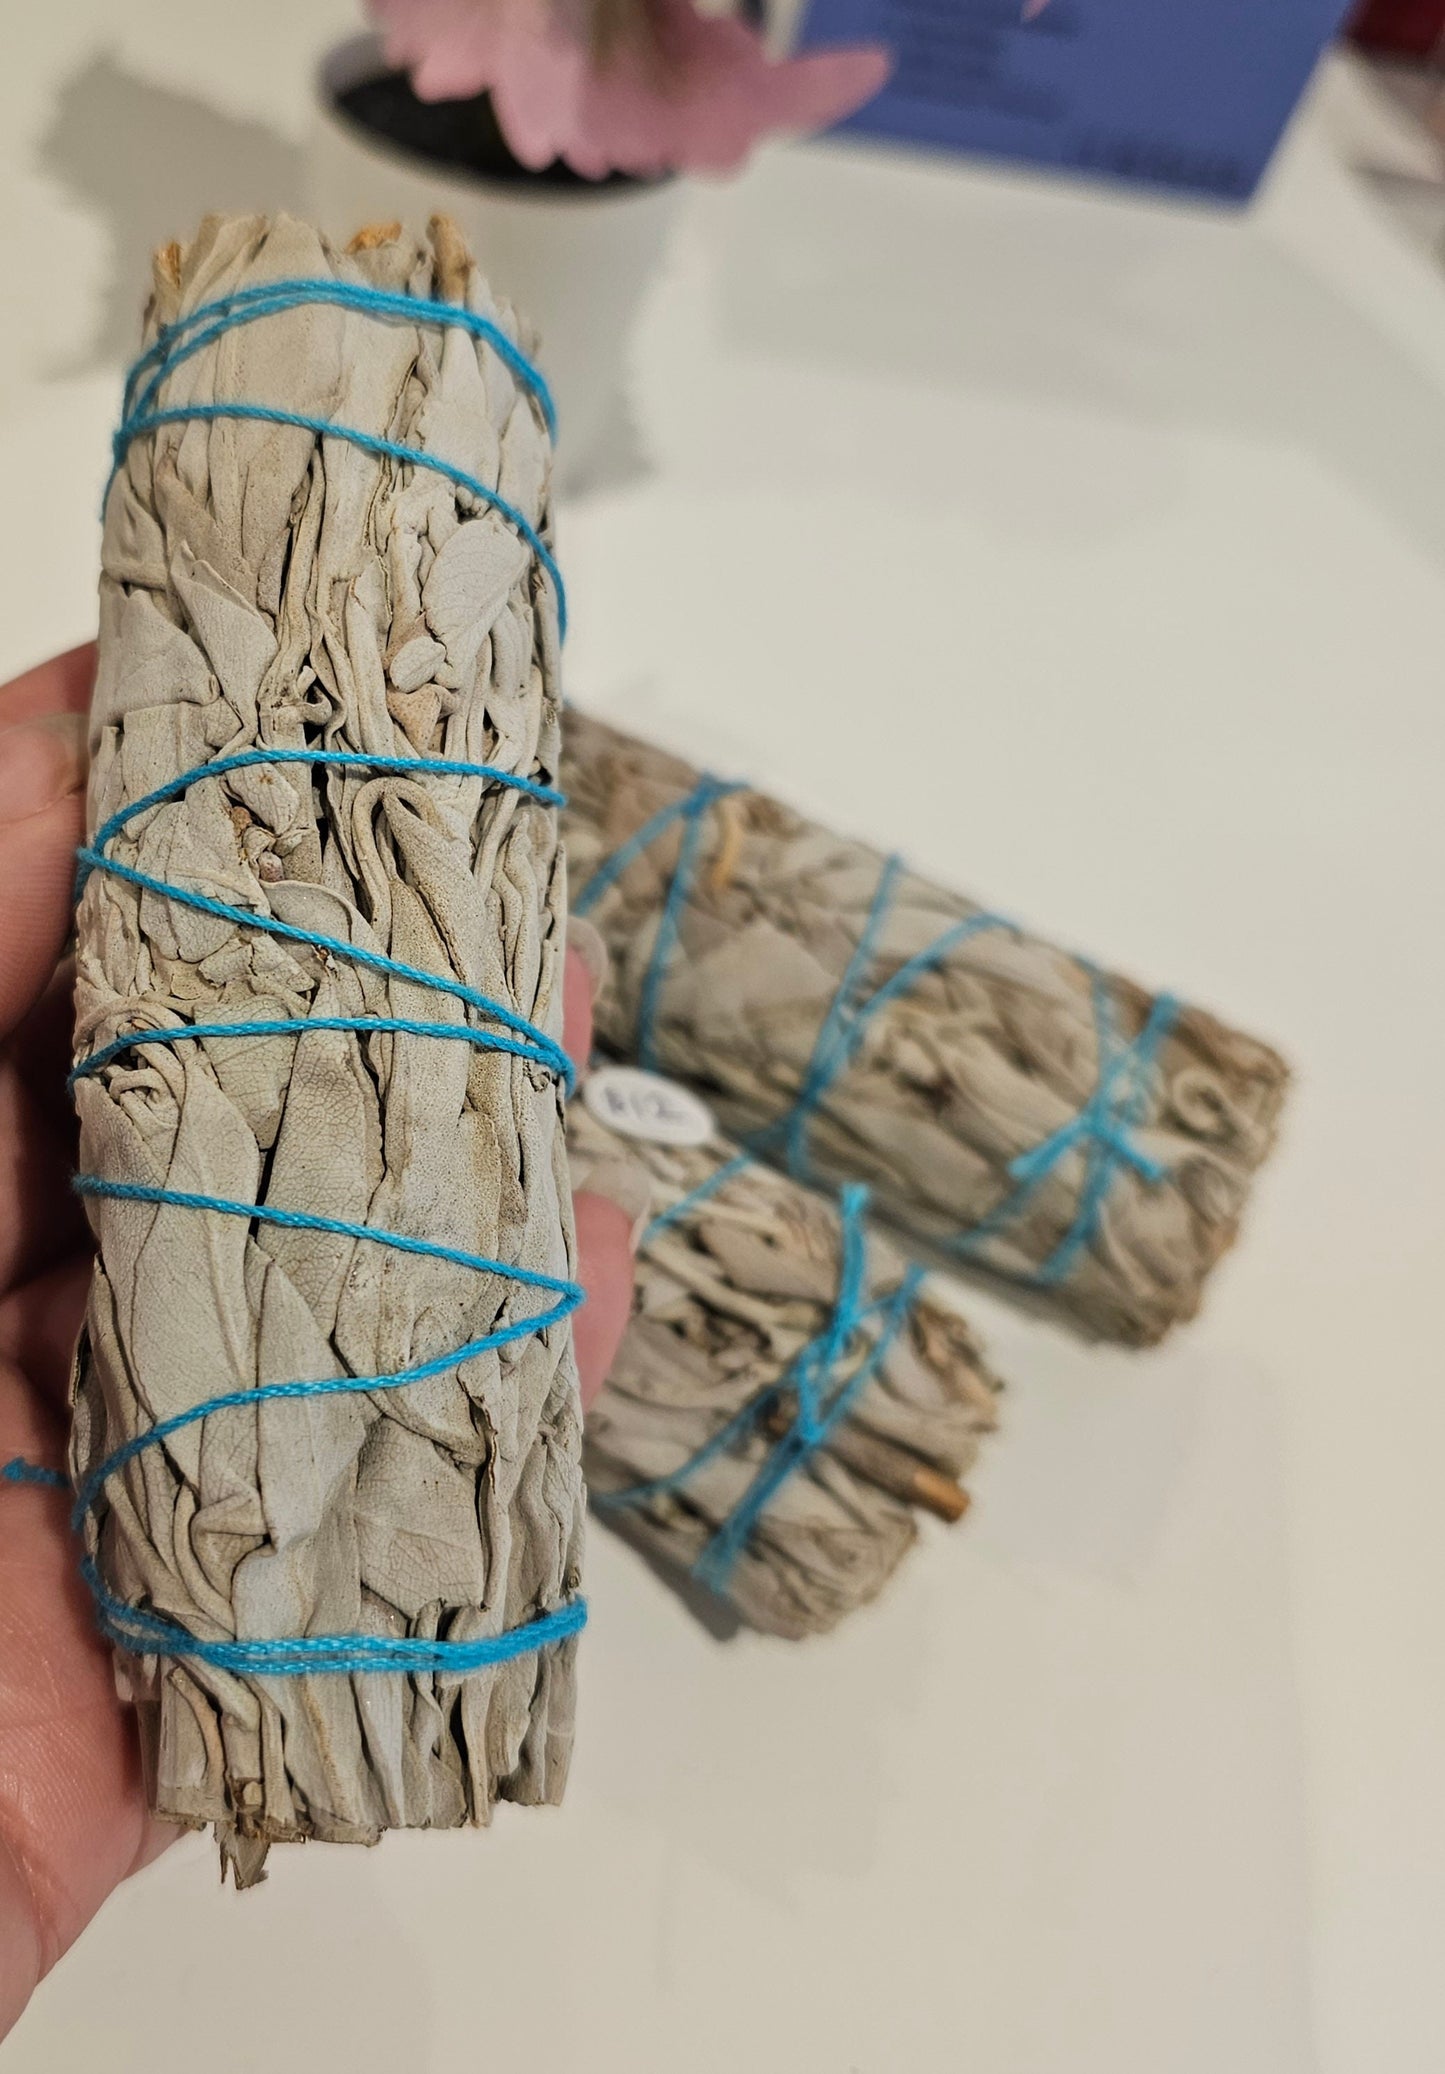 White Sage / Californian / Cleanse and Clear